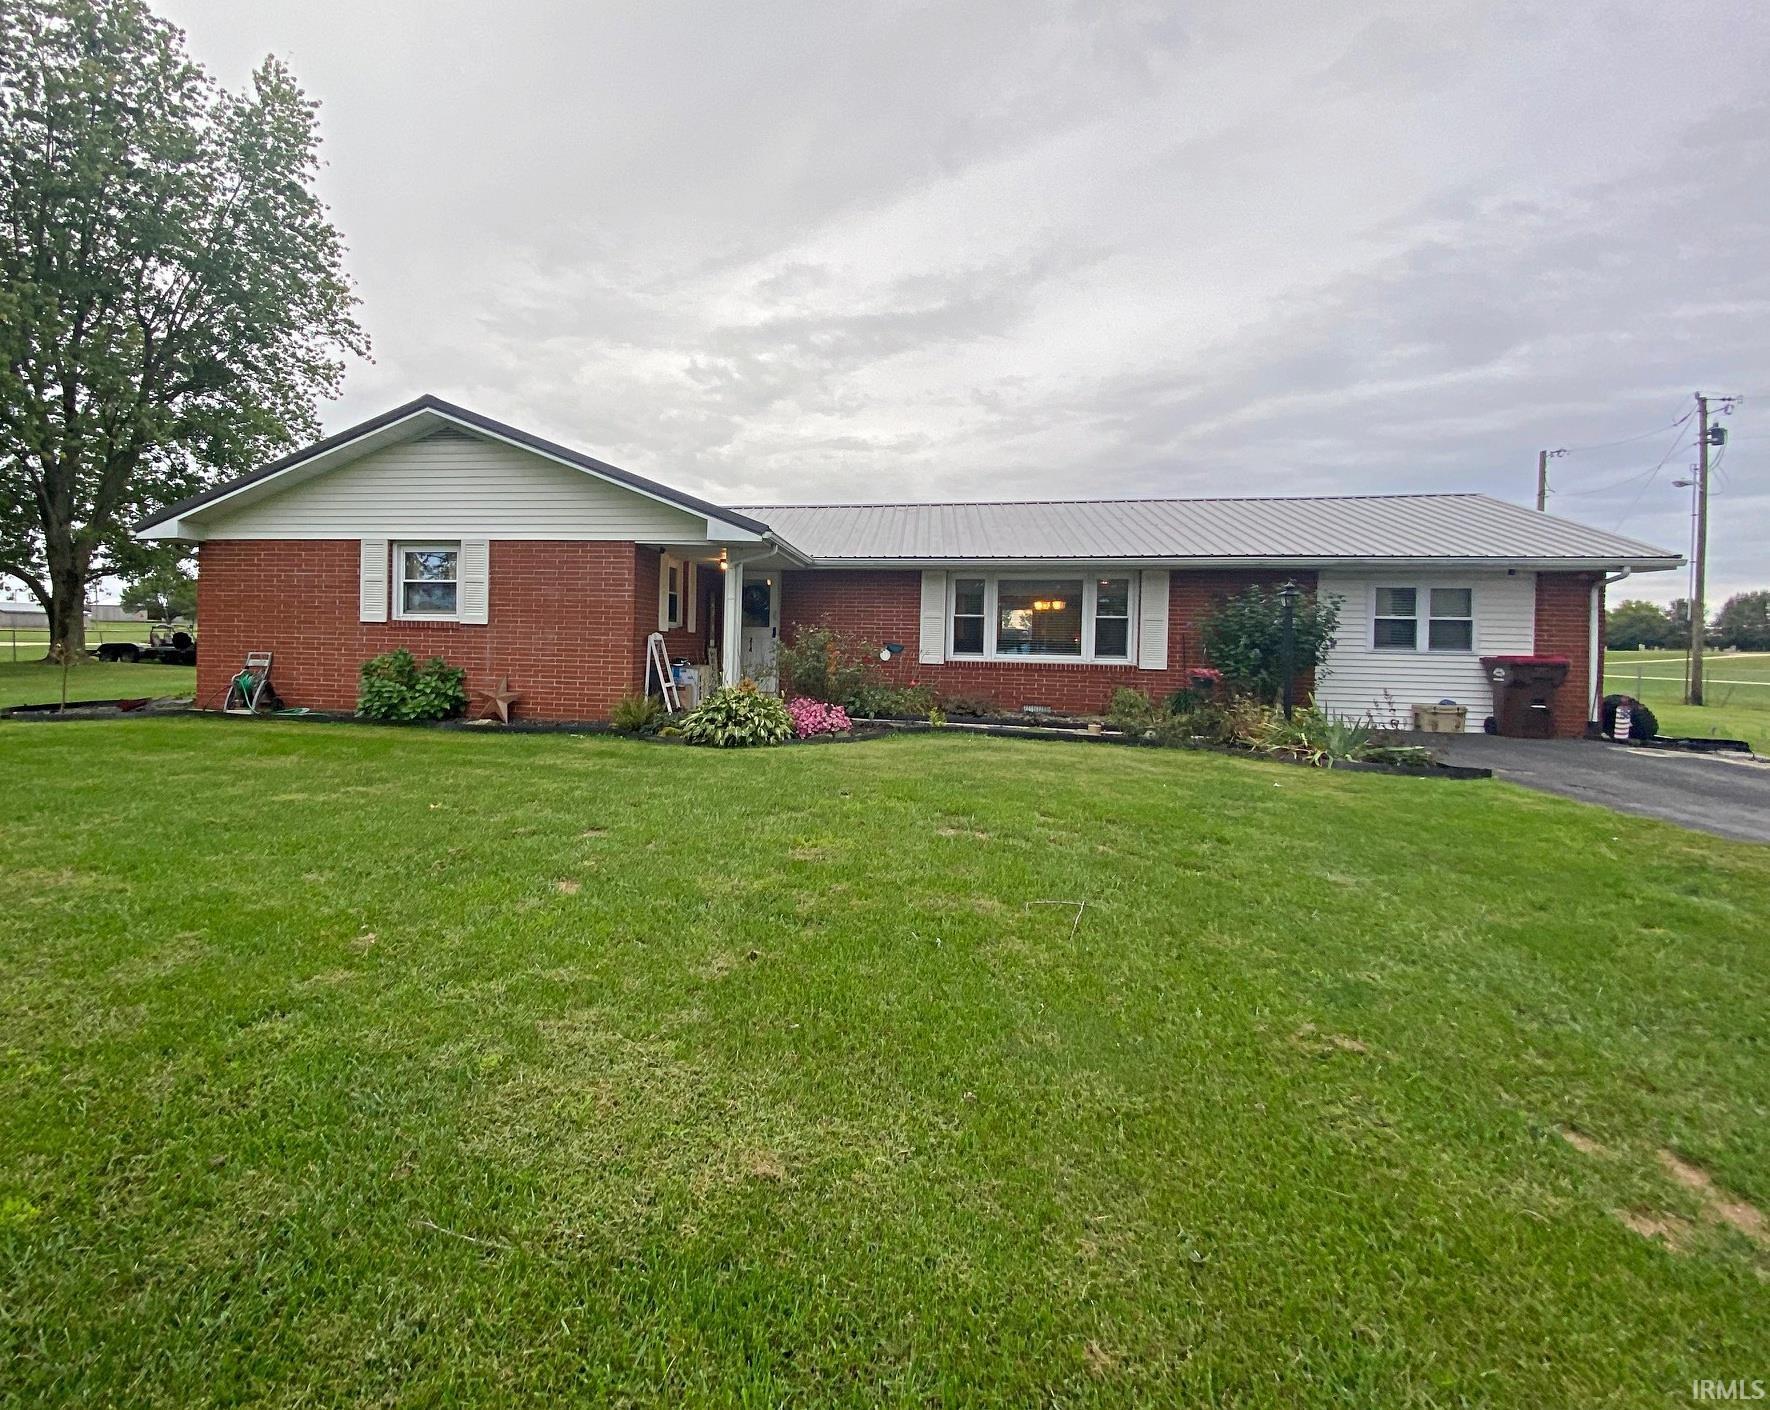 214 E Indian Street, Elnora, IN 47529